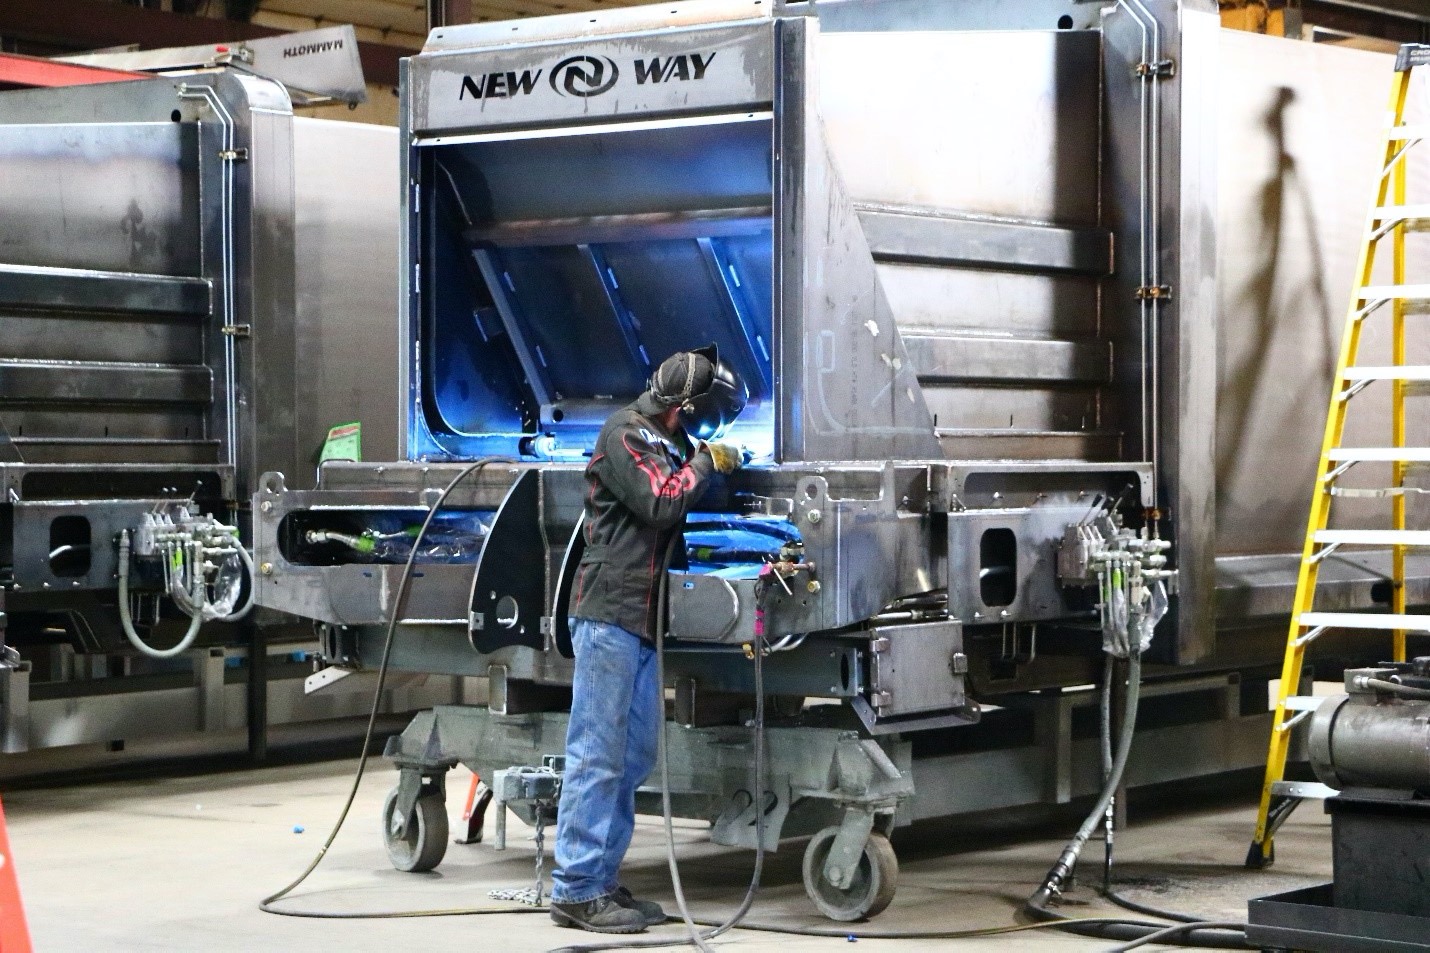 Welder working in New Way Trucks manufacturing facility